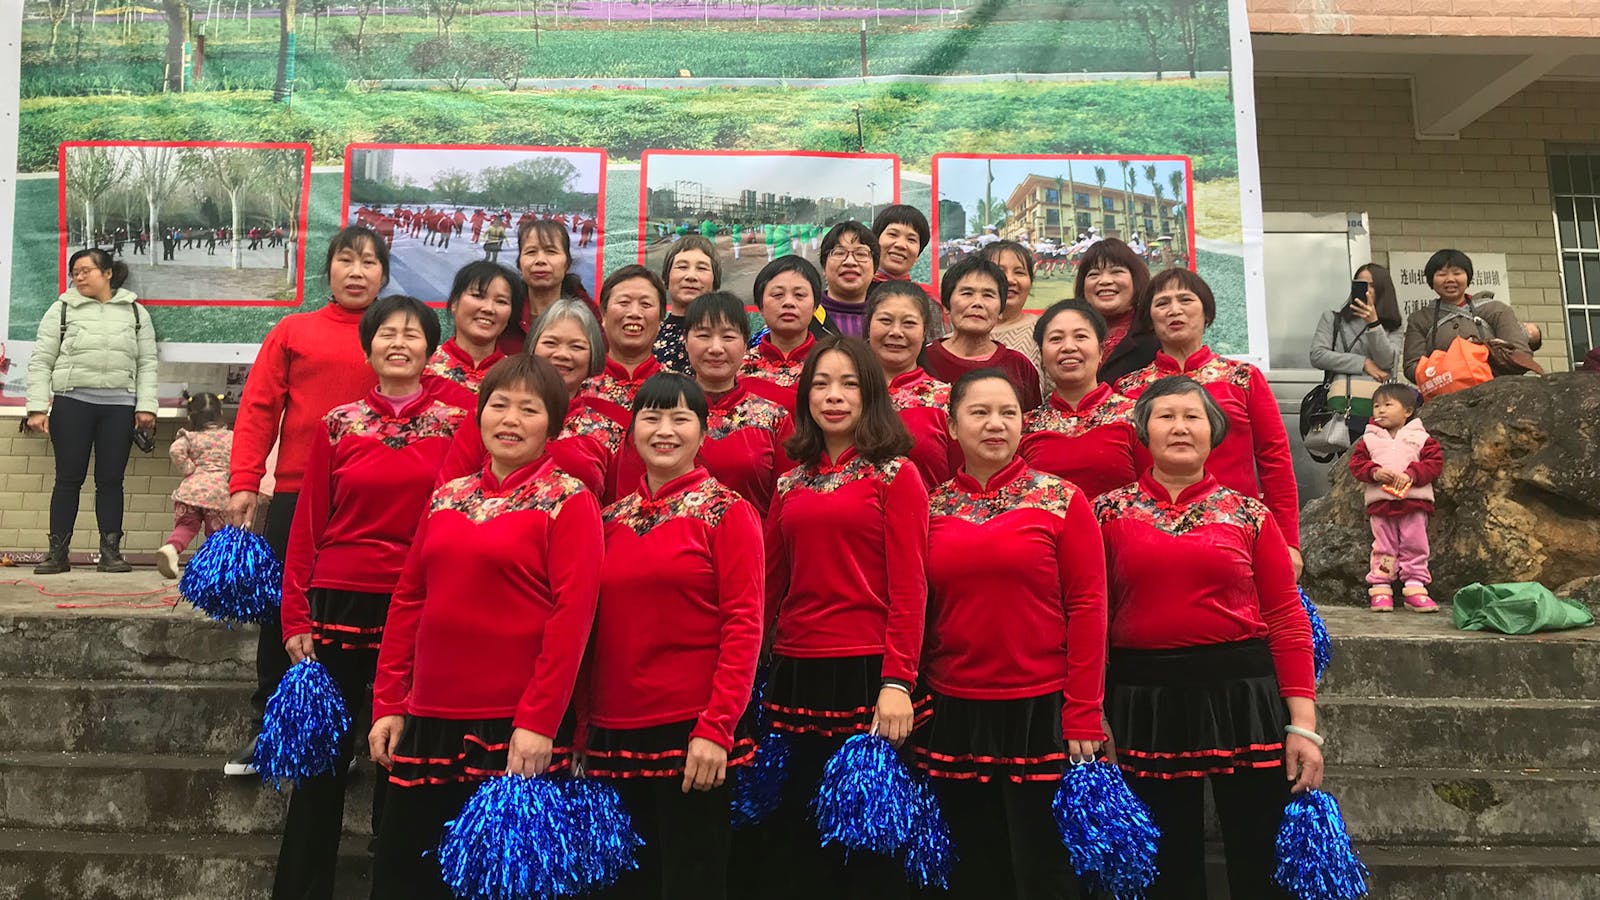 The Jitian village dance group, in matching outfits purchased on Pinduoduo, at the Lunar New Year gala.